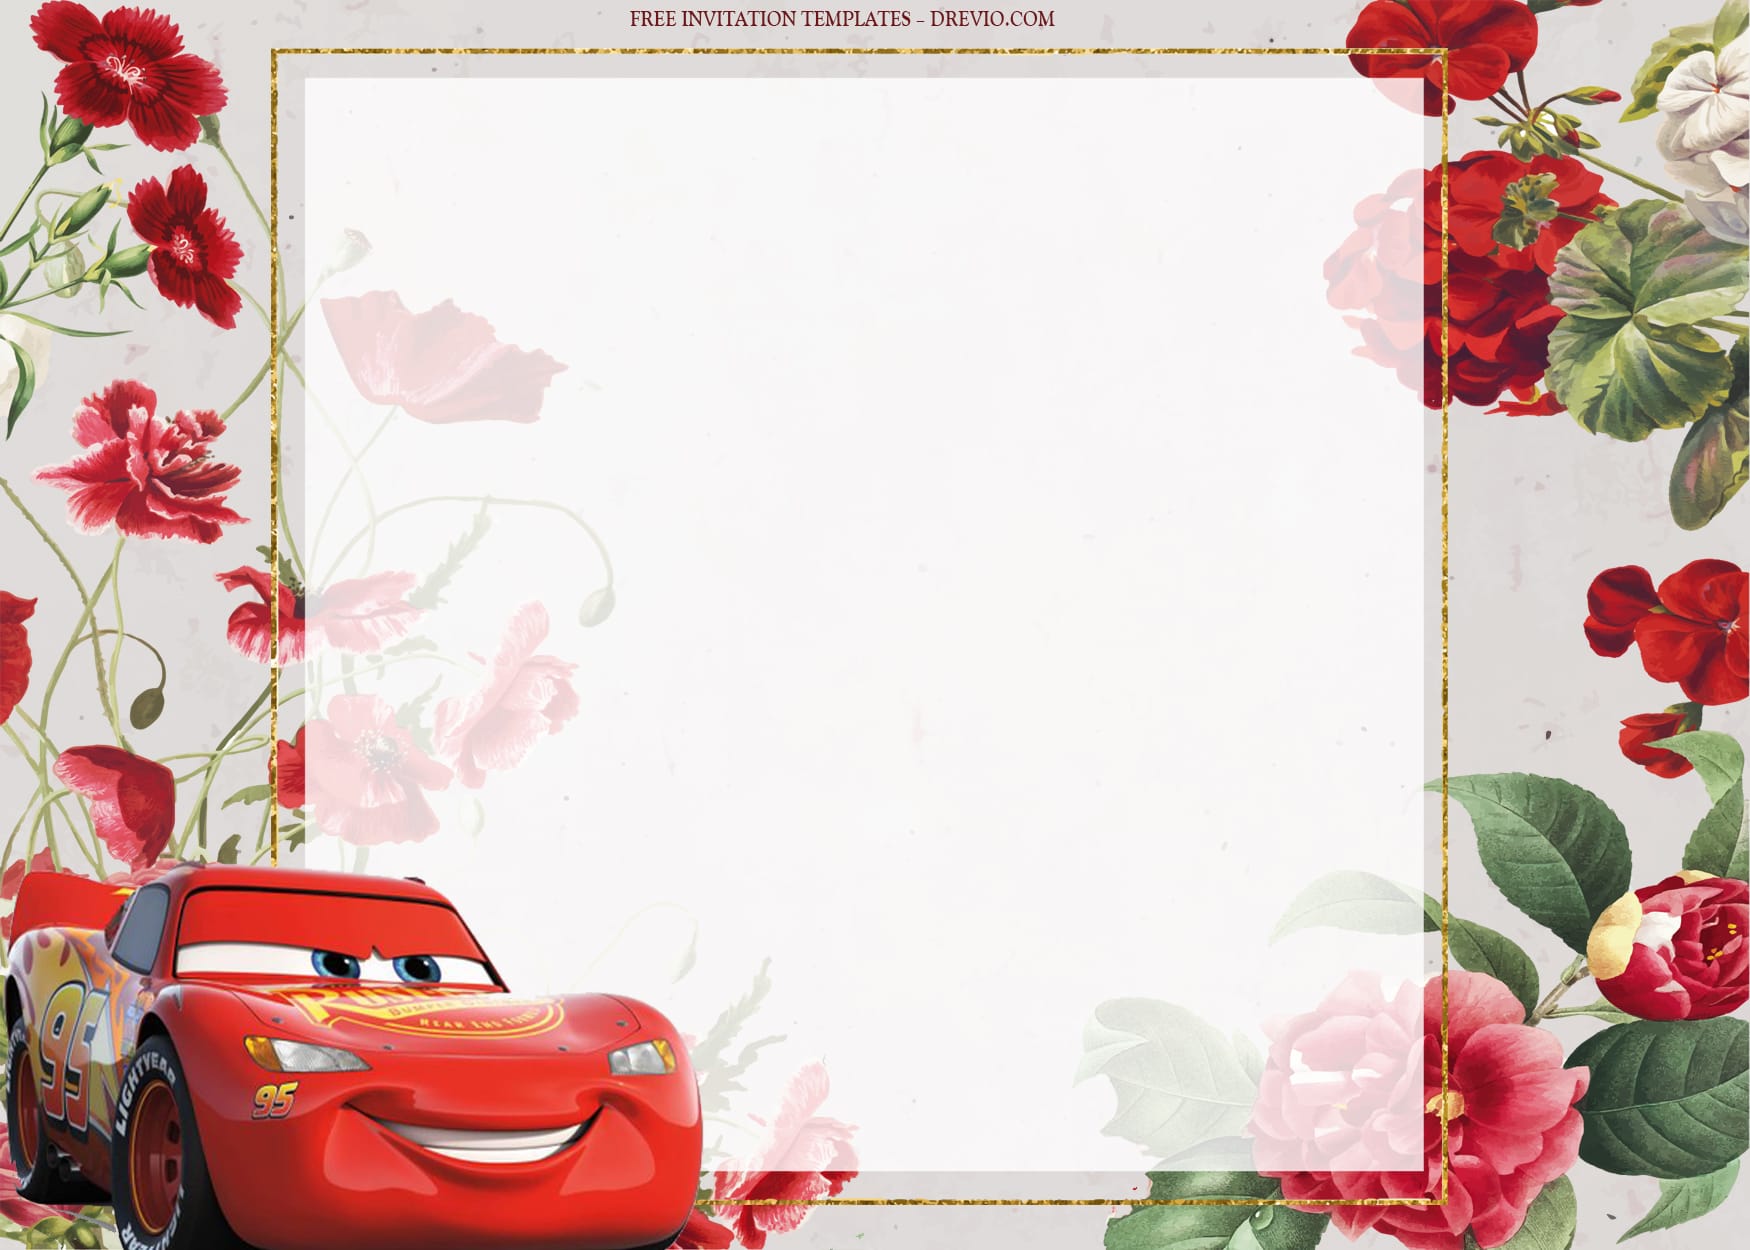 8+ The Cars Racing Through Highway Birthday Invitation Templates Type Two